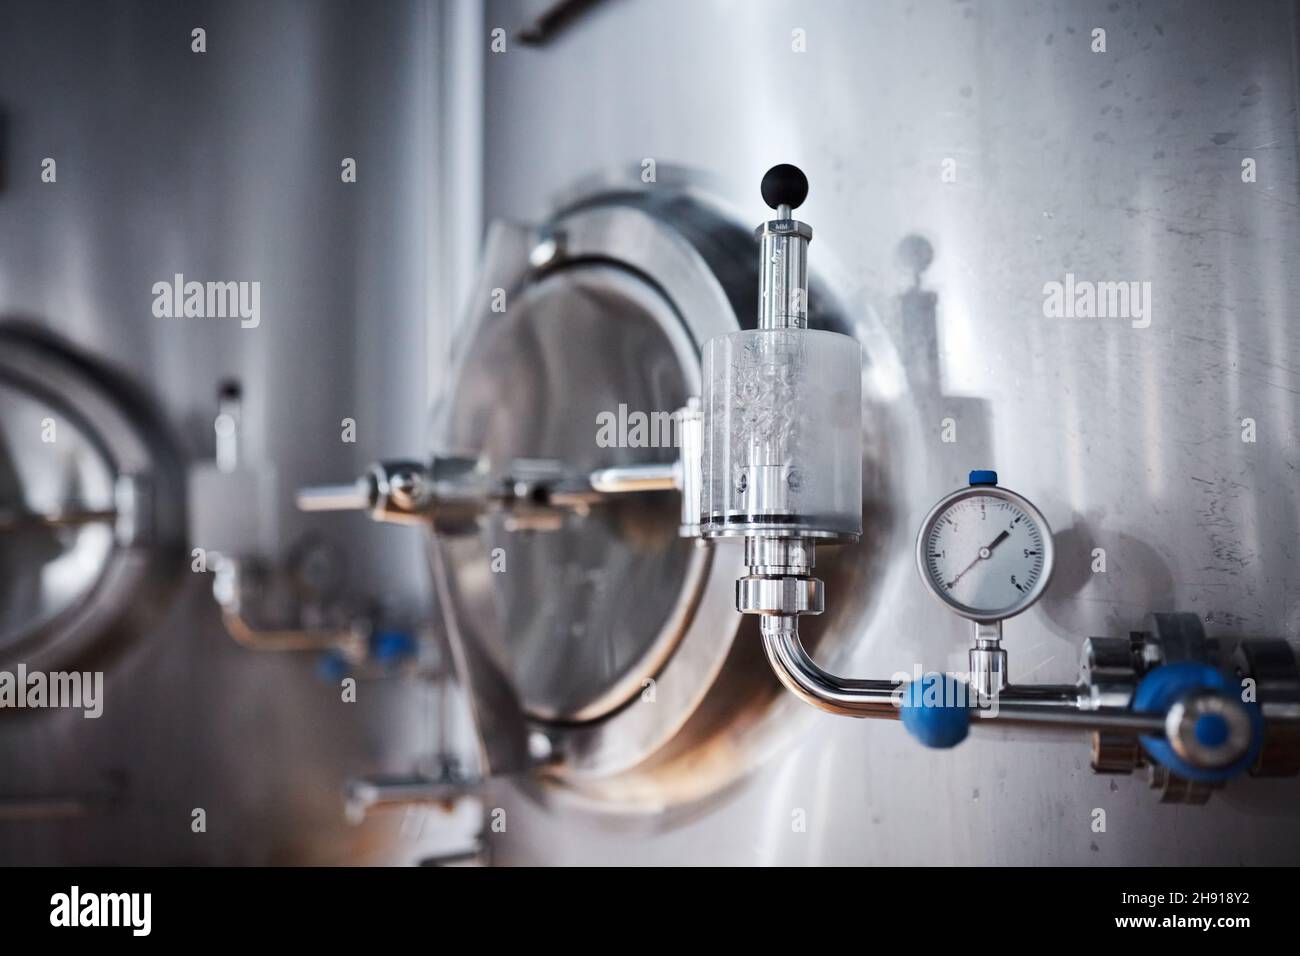 Equipment for the production of craft beer, containers for fermentation in the climatic chamber, pressure gauge with tubes and stainless steel tanks. Stock Photo